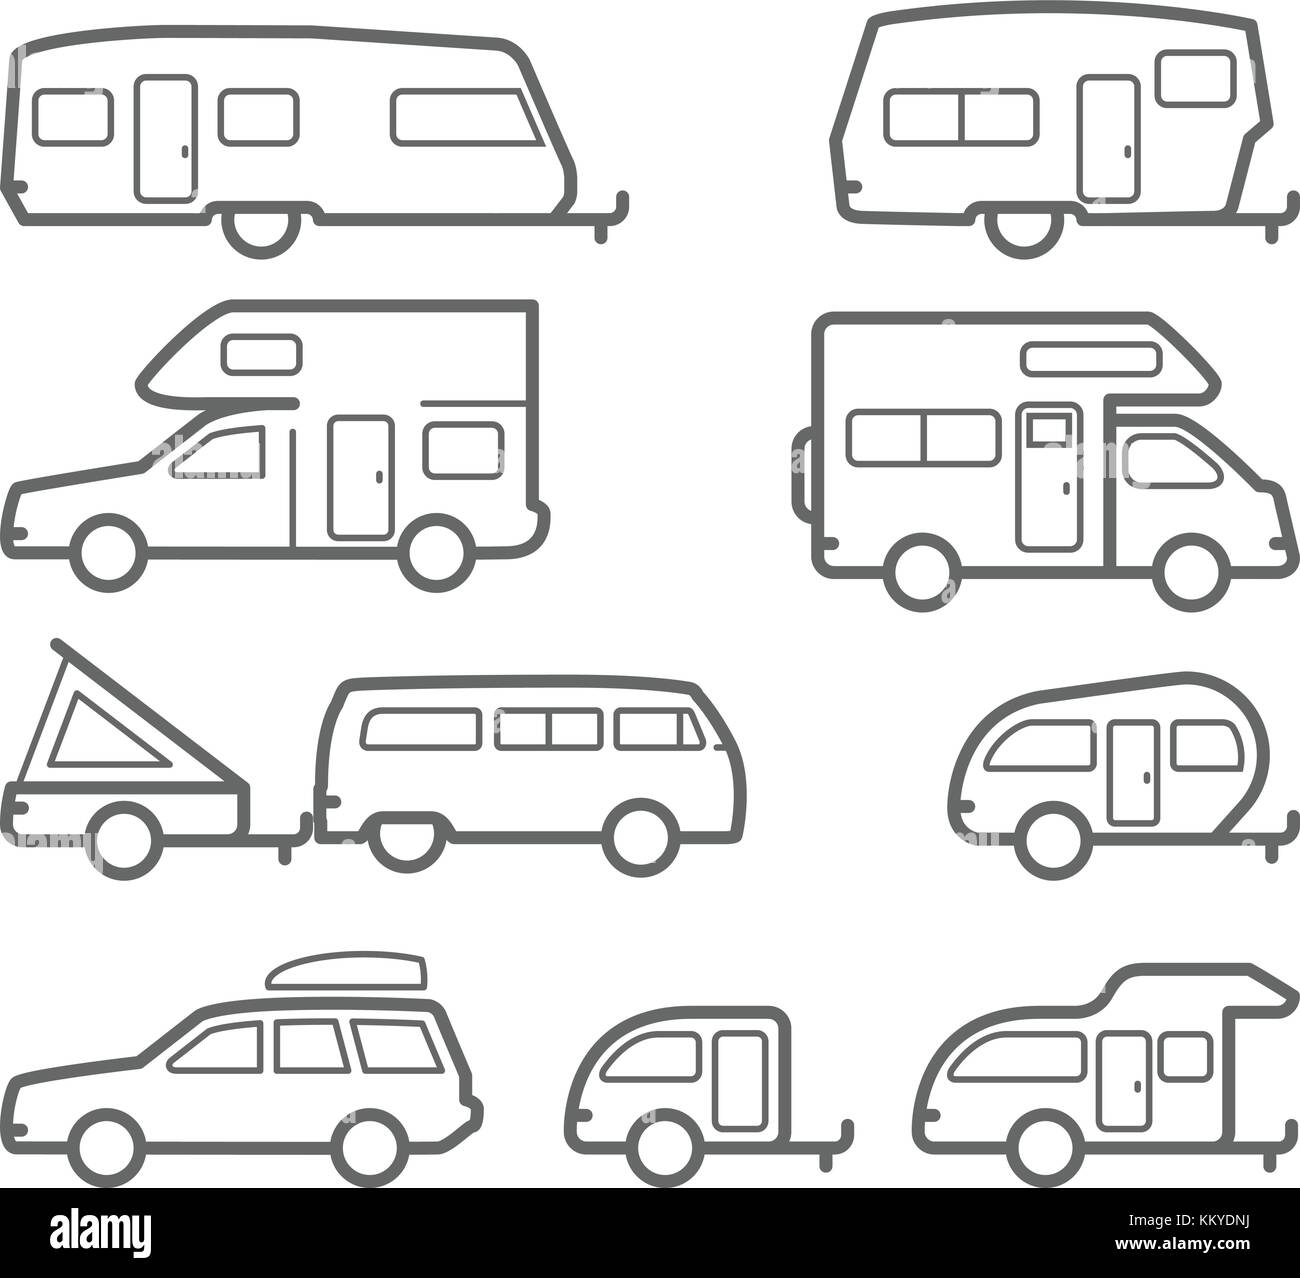 Caravans and camper trailers - road trip icons Stock Vector